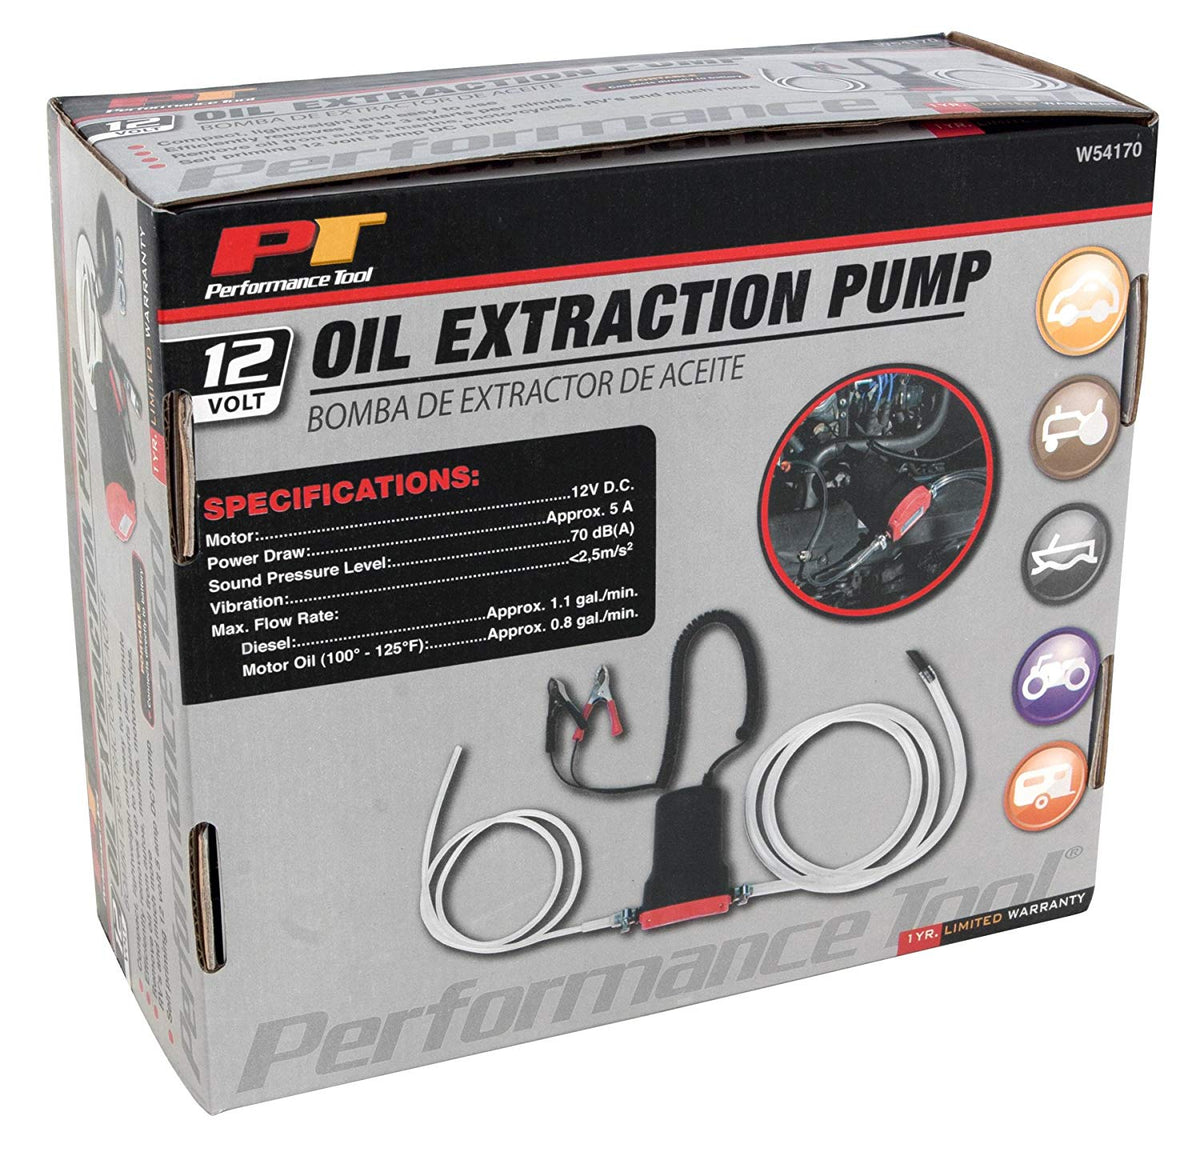 Performance Tool W54170 Portable Oil Extraction Pump, 12V, 5 Amp